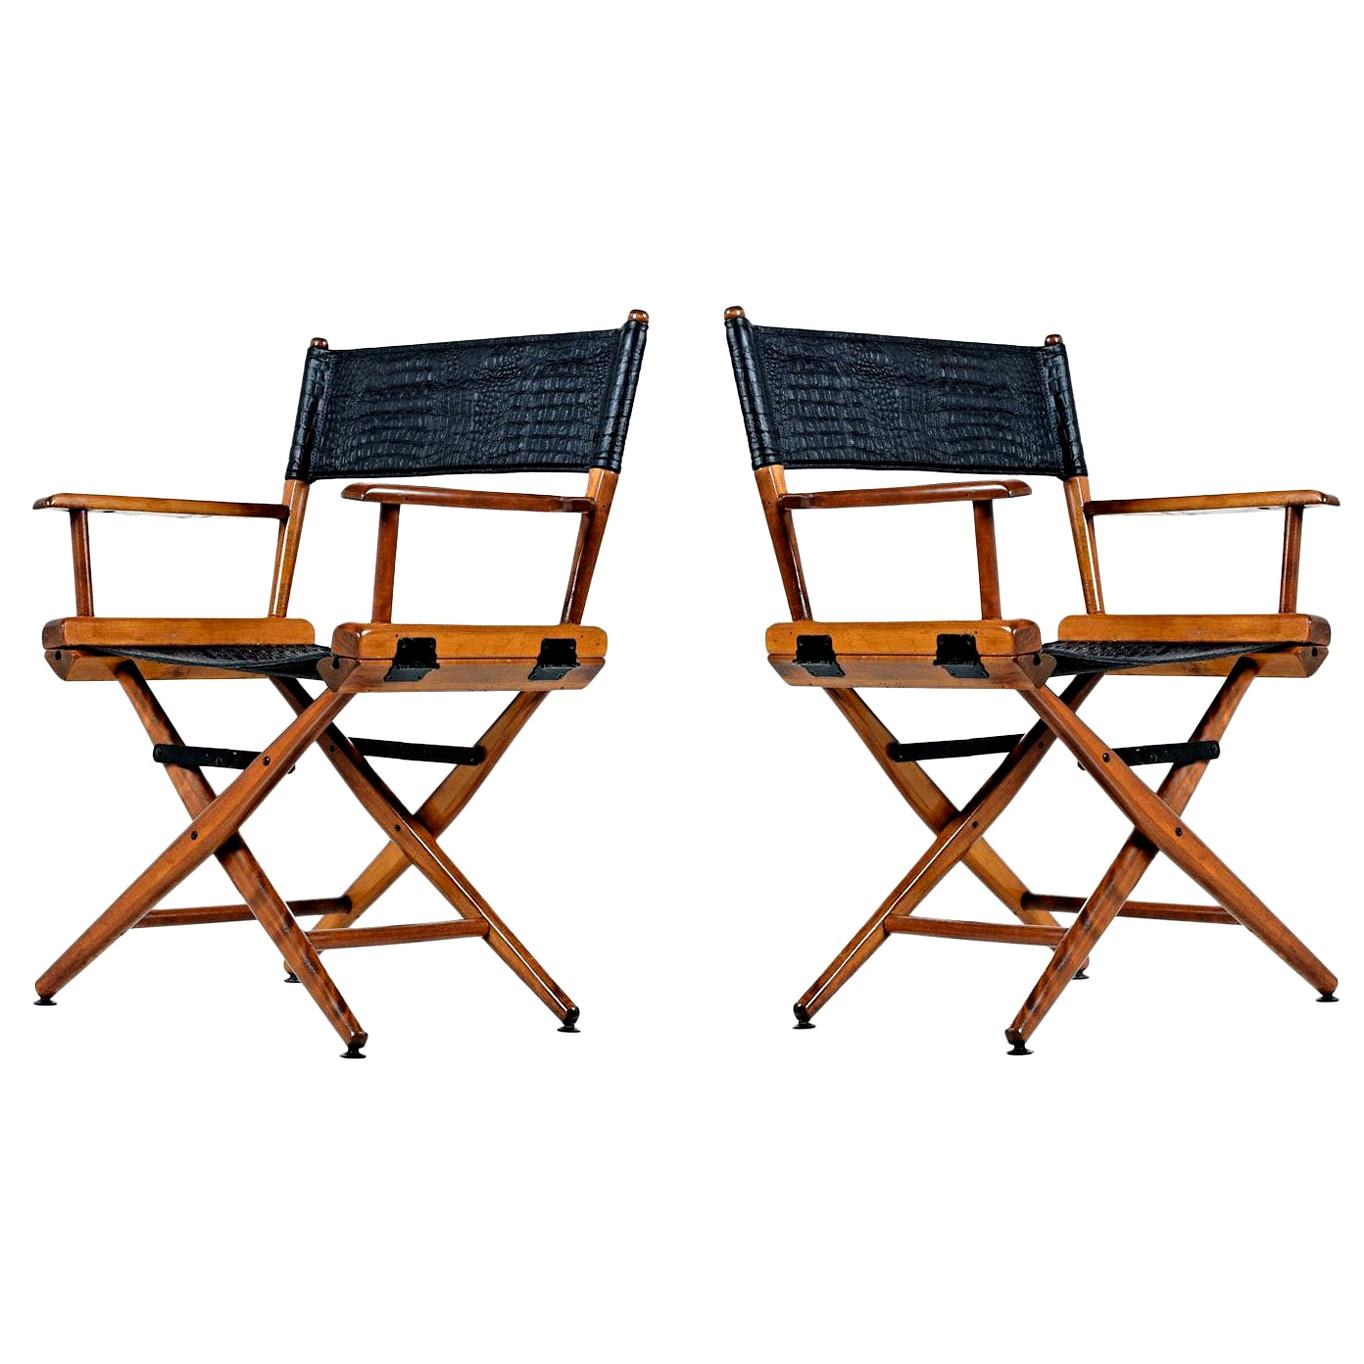 Director Chair Set by Telescope, Restored with Black Alligator Leather